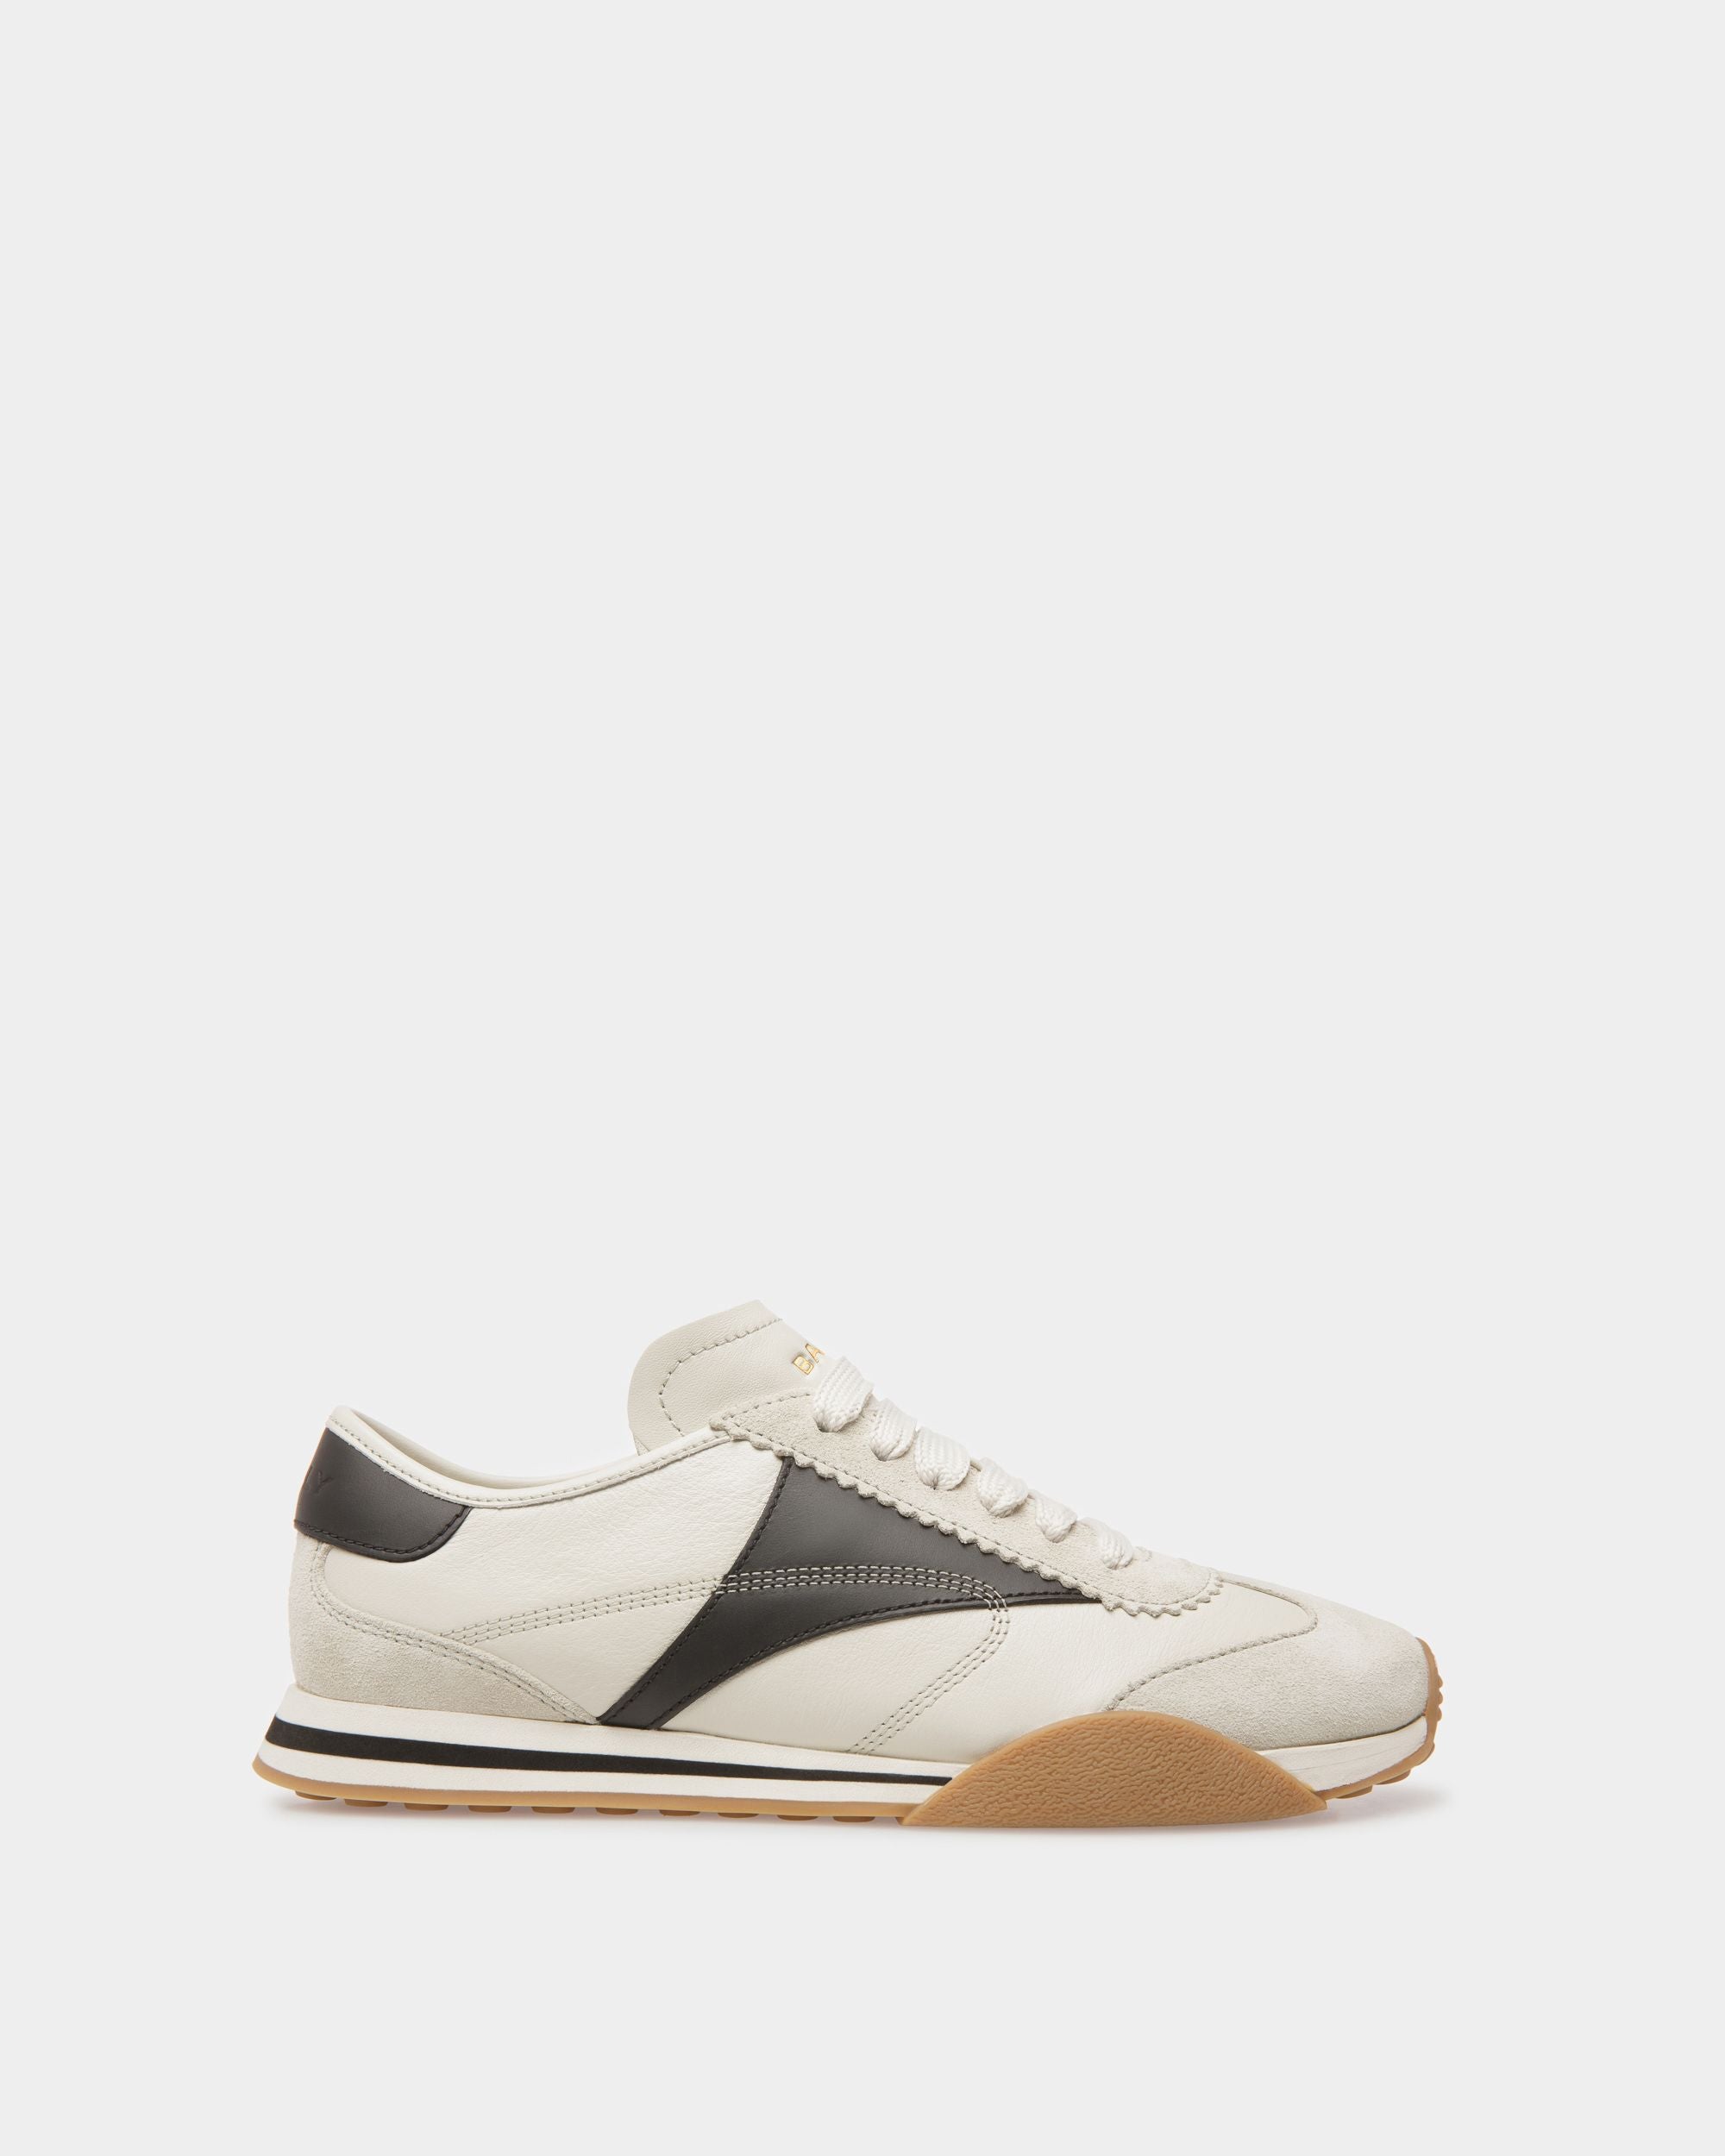 Sonney | Women's Sneakers | Black And Dusty White Leather | Bally | Still Life Side